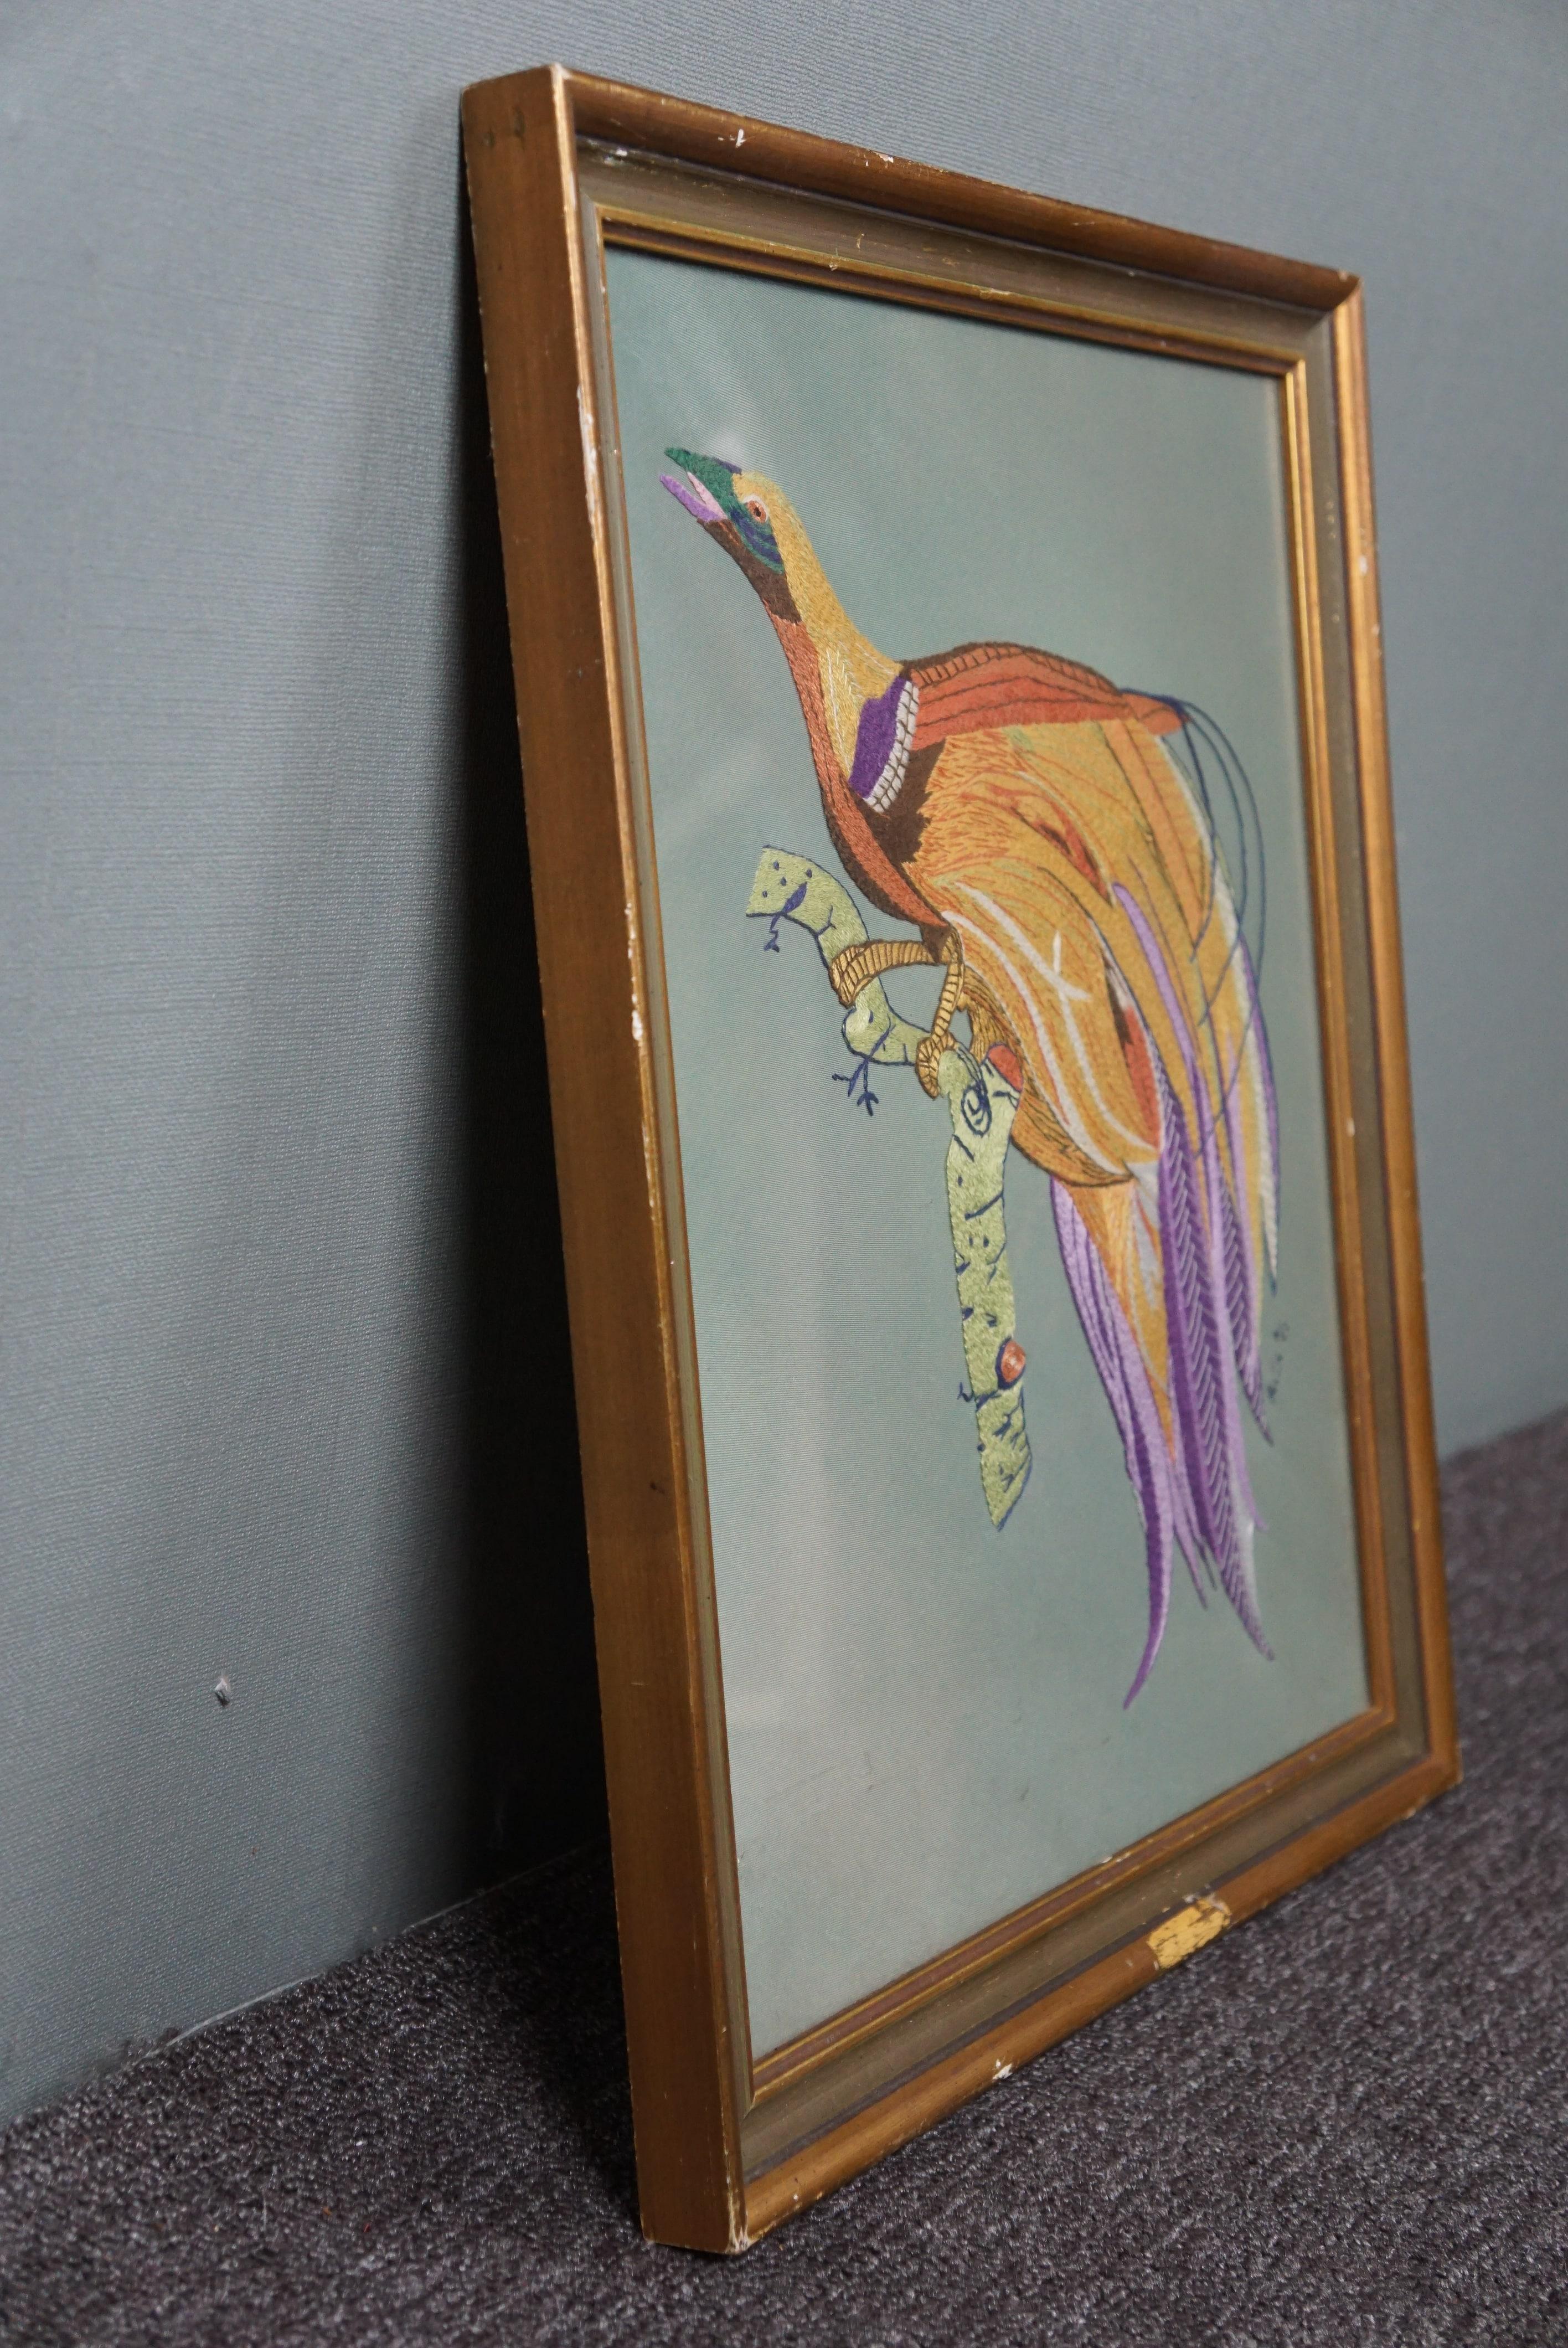 Hand-Crafted Artwork with colorful embroidery, handmade in 1971 For Sale